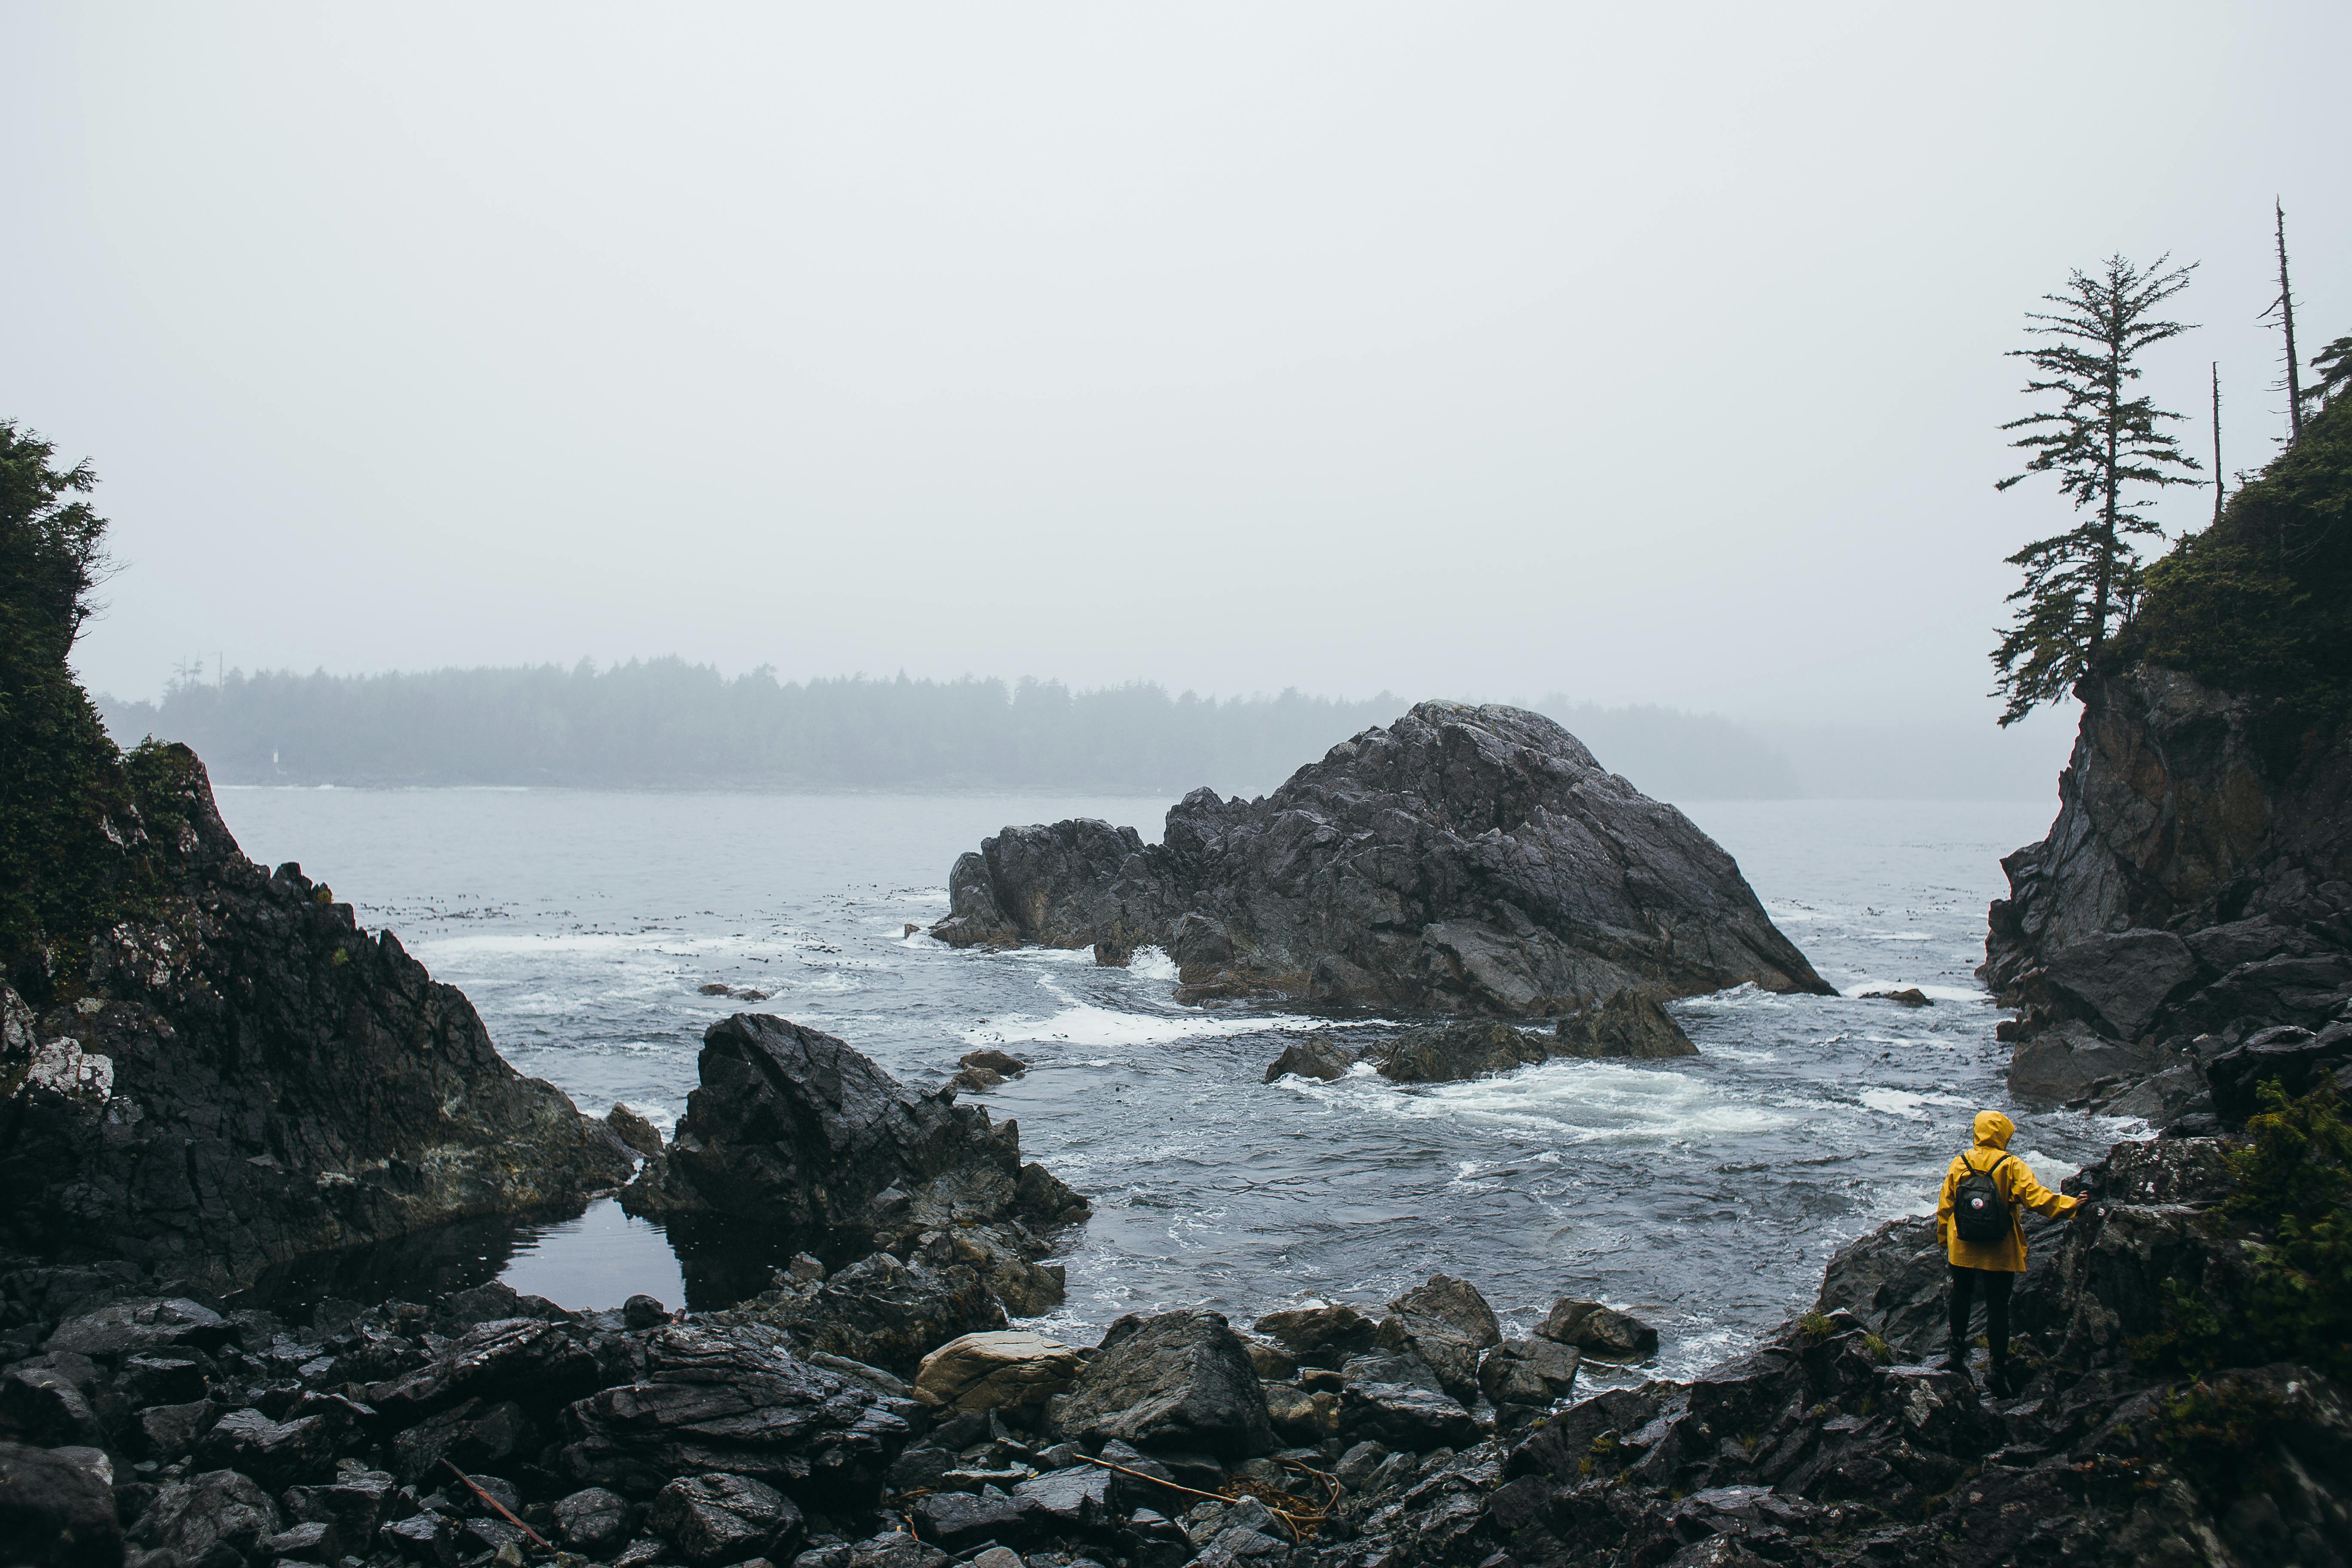 lonely person on rocky coast in overcast weather